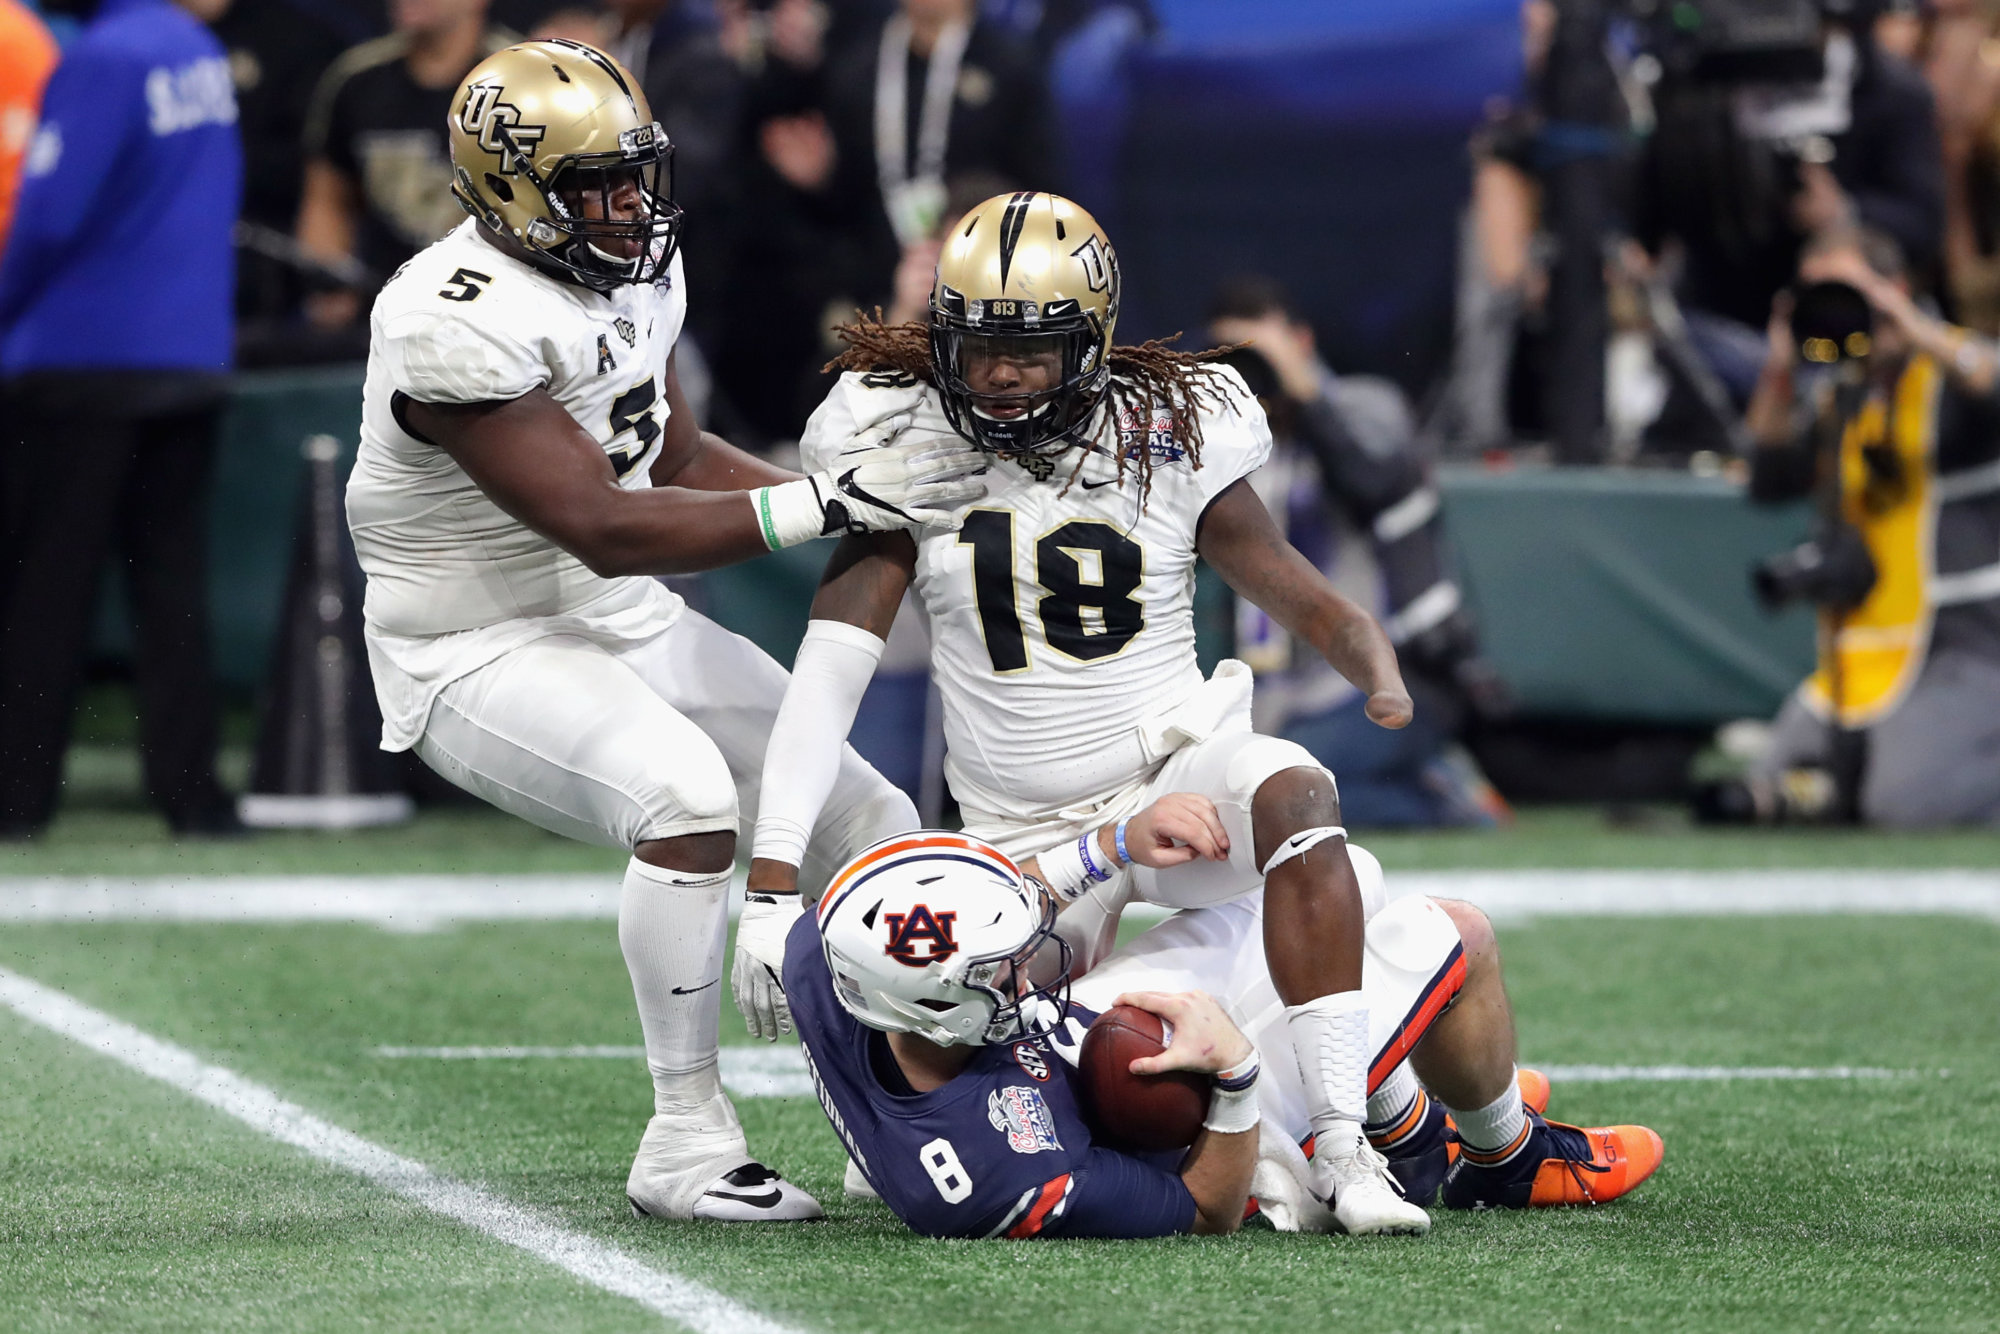 ATLANTA, GA - JANUARY 01:  Shaquem Griffin #18 of the UCF Knights steps over Jarrett Stidham #8 of the Auburn Tigers after making a sack in the second quarter during the Chick-fil-A Peach Bowl at Mercedes-Benz Stadium on January 1, 2018 in Atlanta, Georgia.  (Photo by Streeter Lecka/Getty Images)